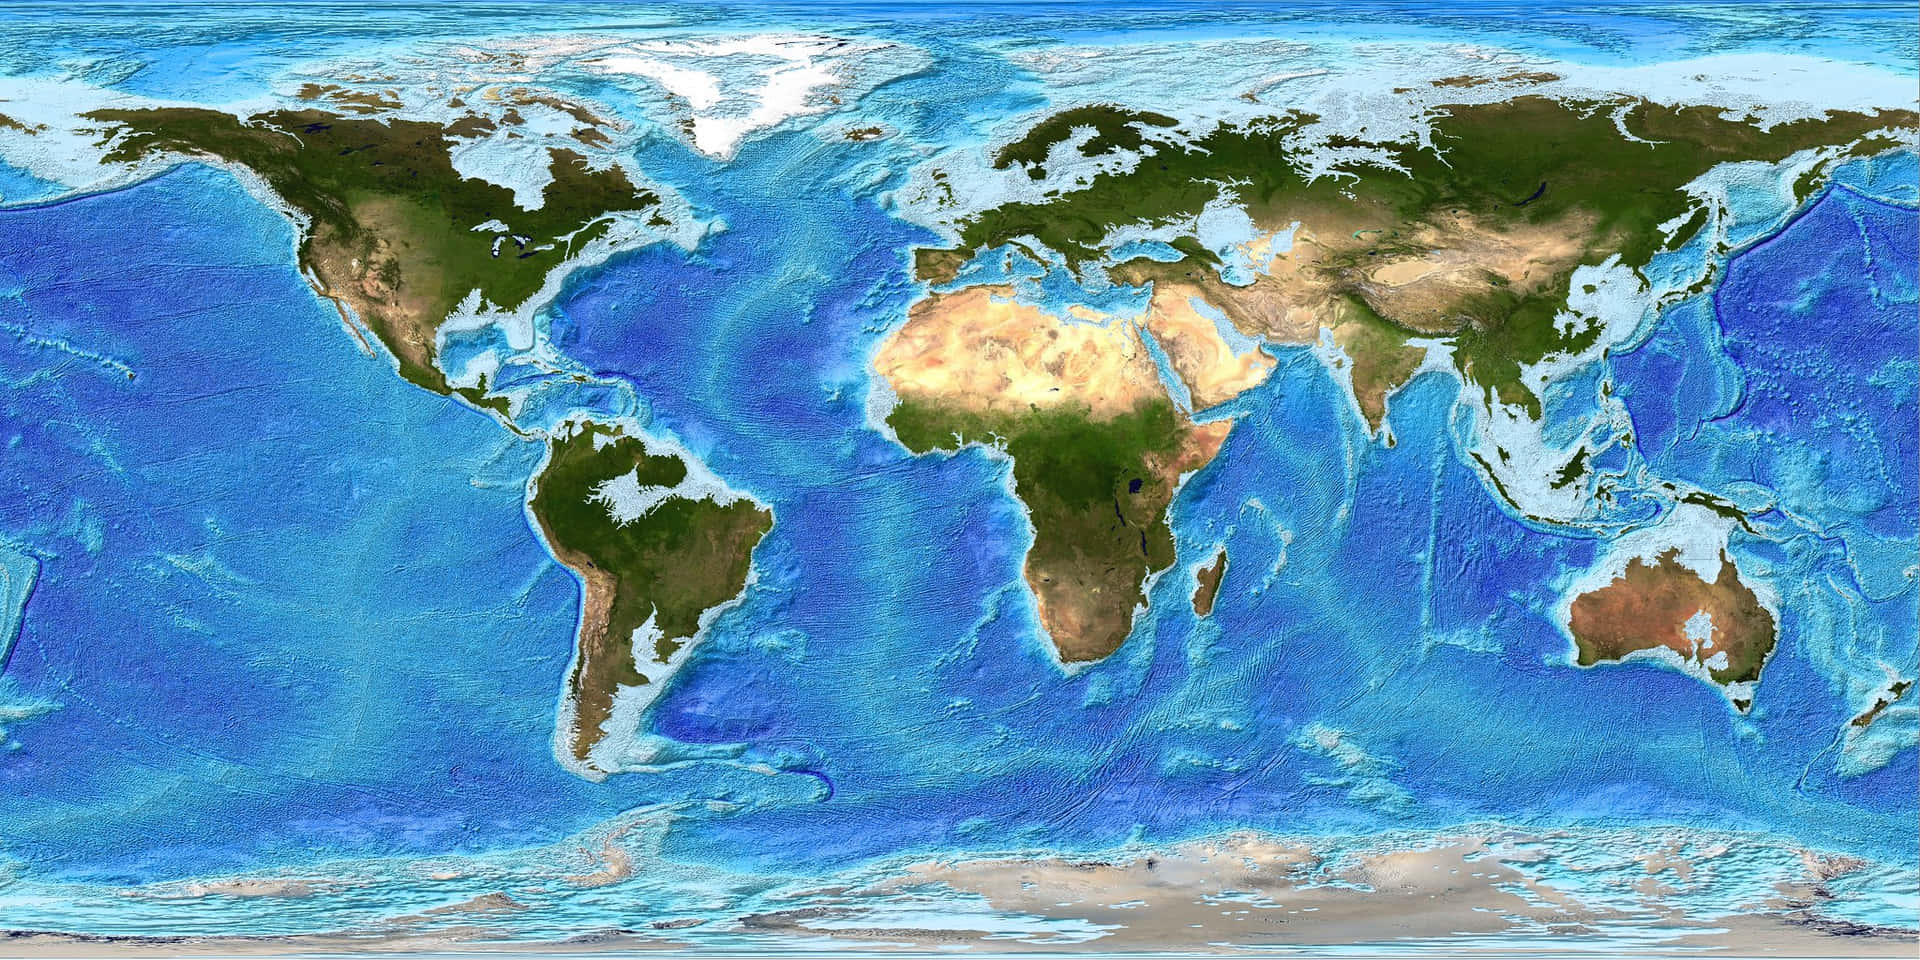 The World Map Is Shown In Blue And Blue